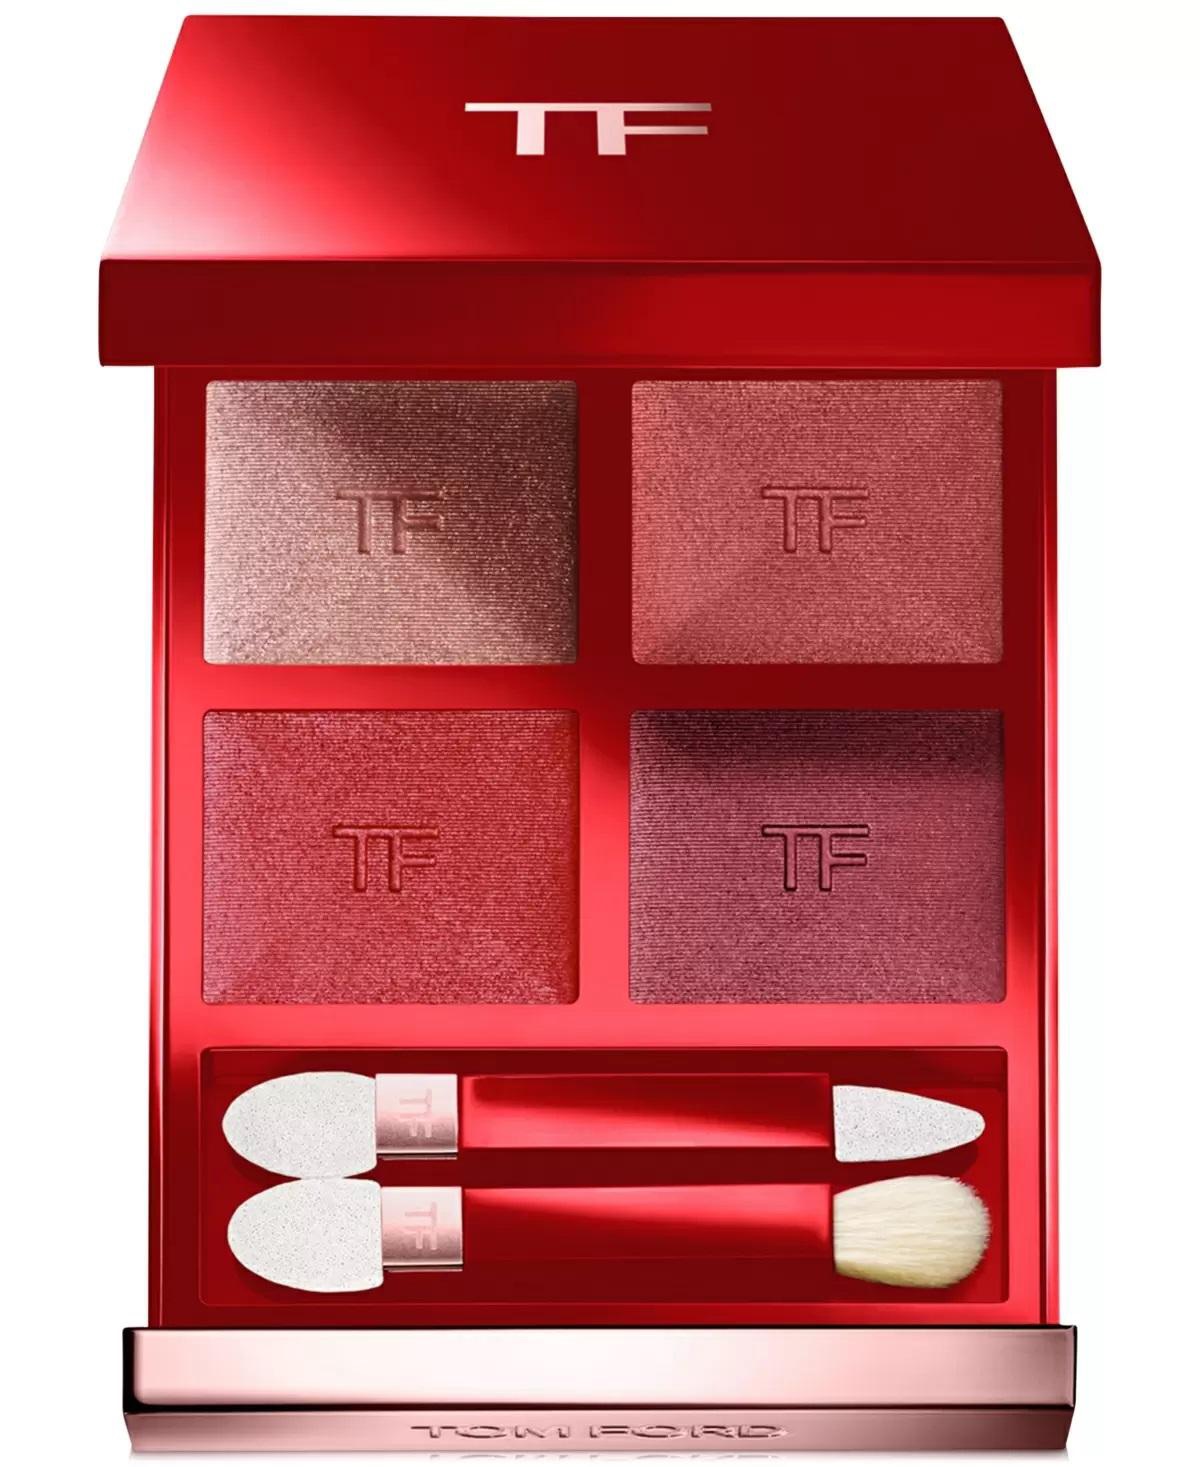 Tom Ford 眼影 $50 EYE COLOR QUAD01 ELECTRIC CHERRY | The Cosmetics Company Store | Beauty Products, Skin Care & Makeup